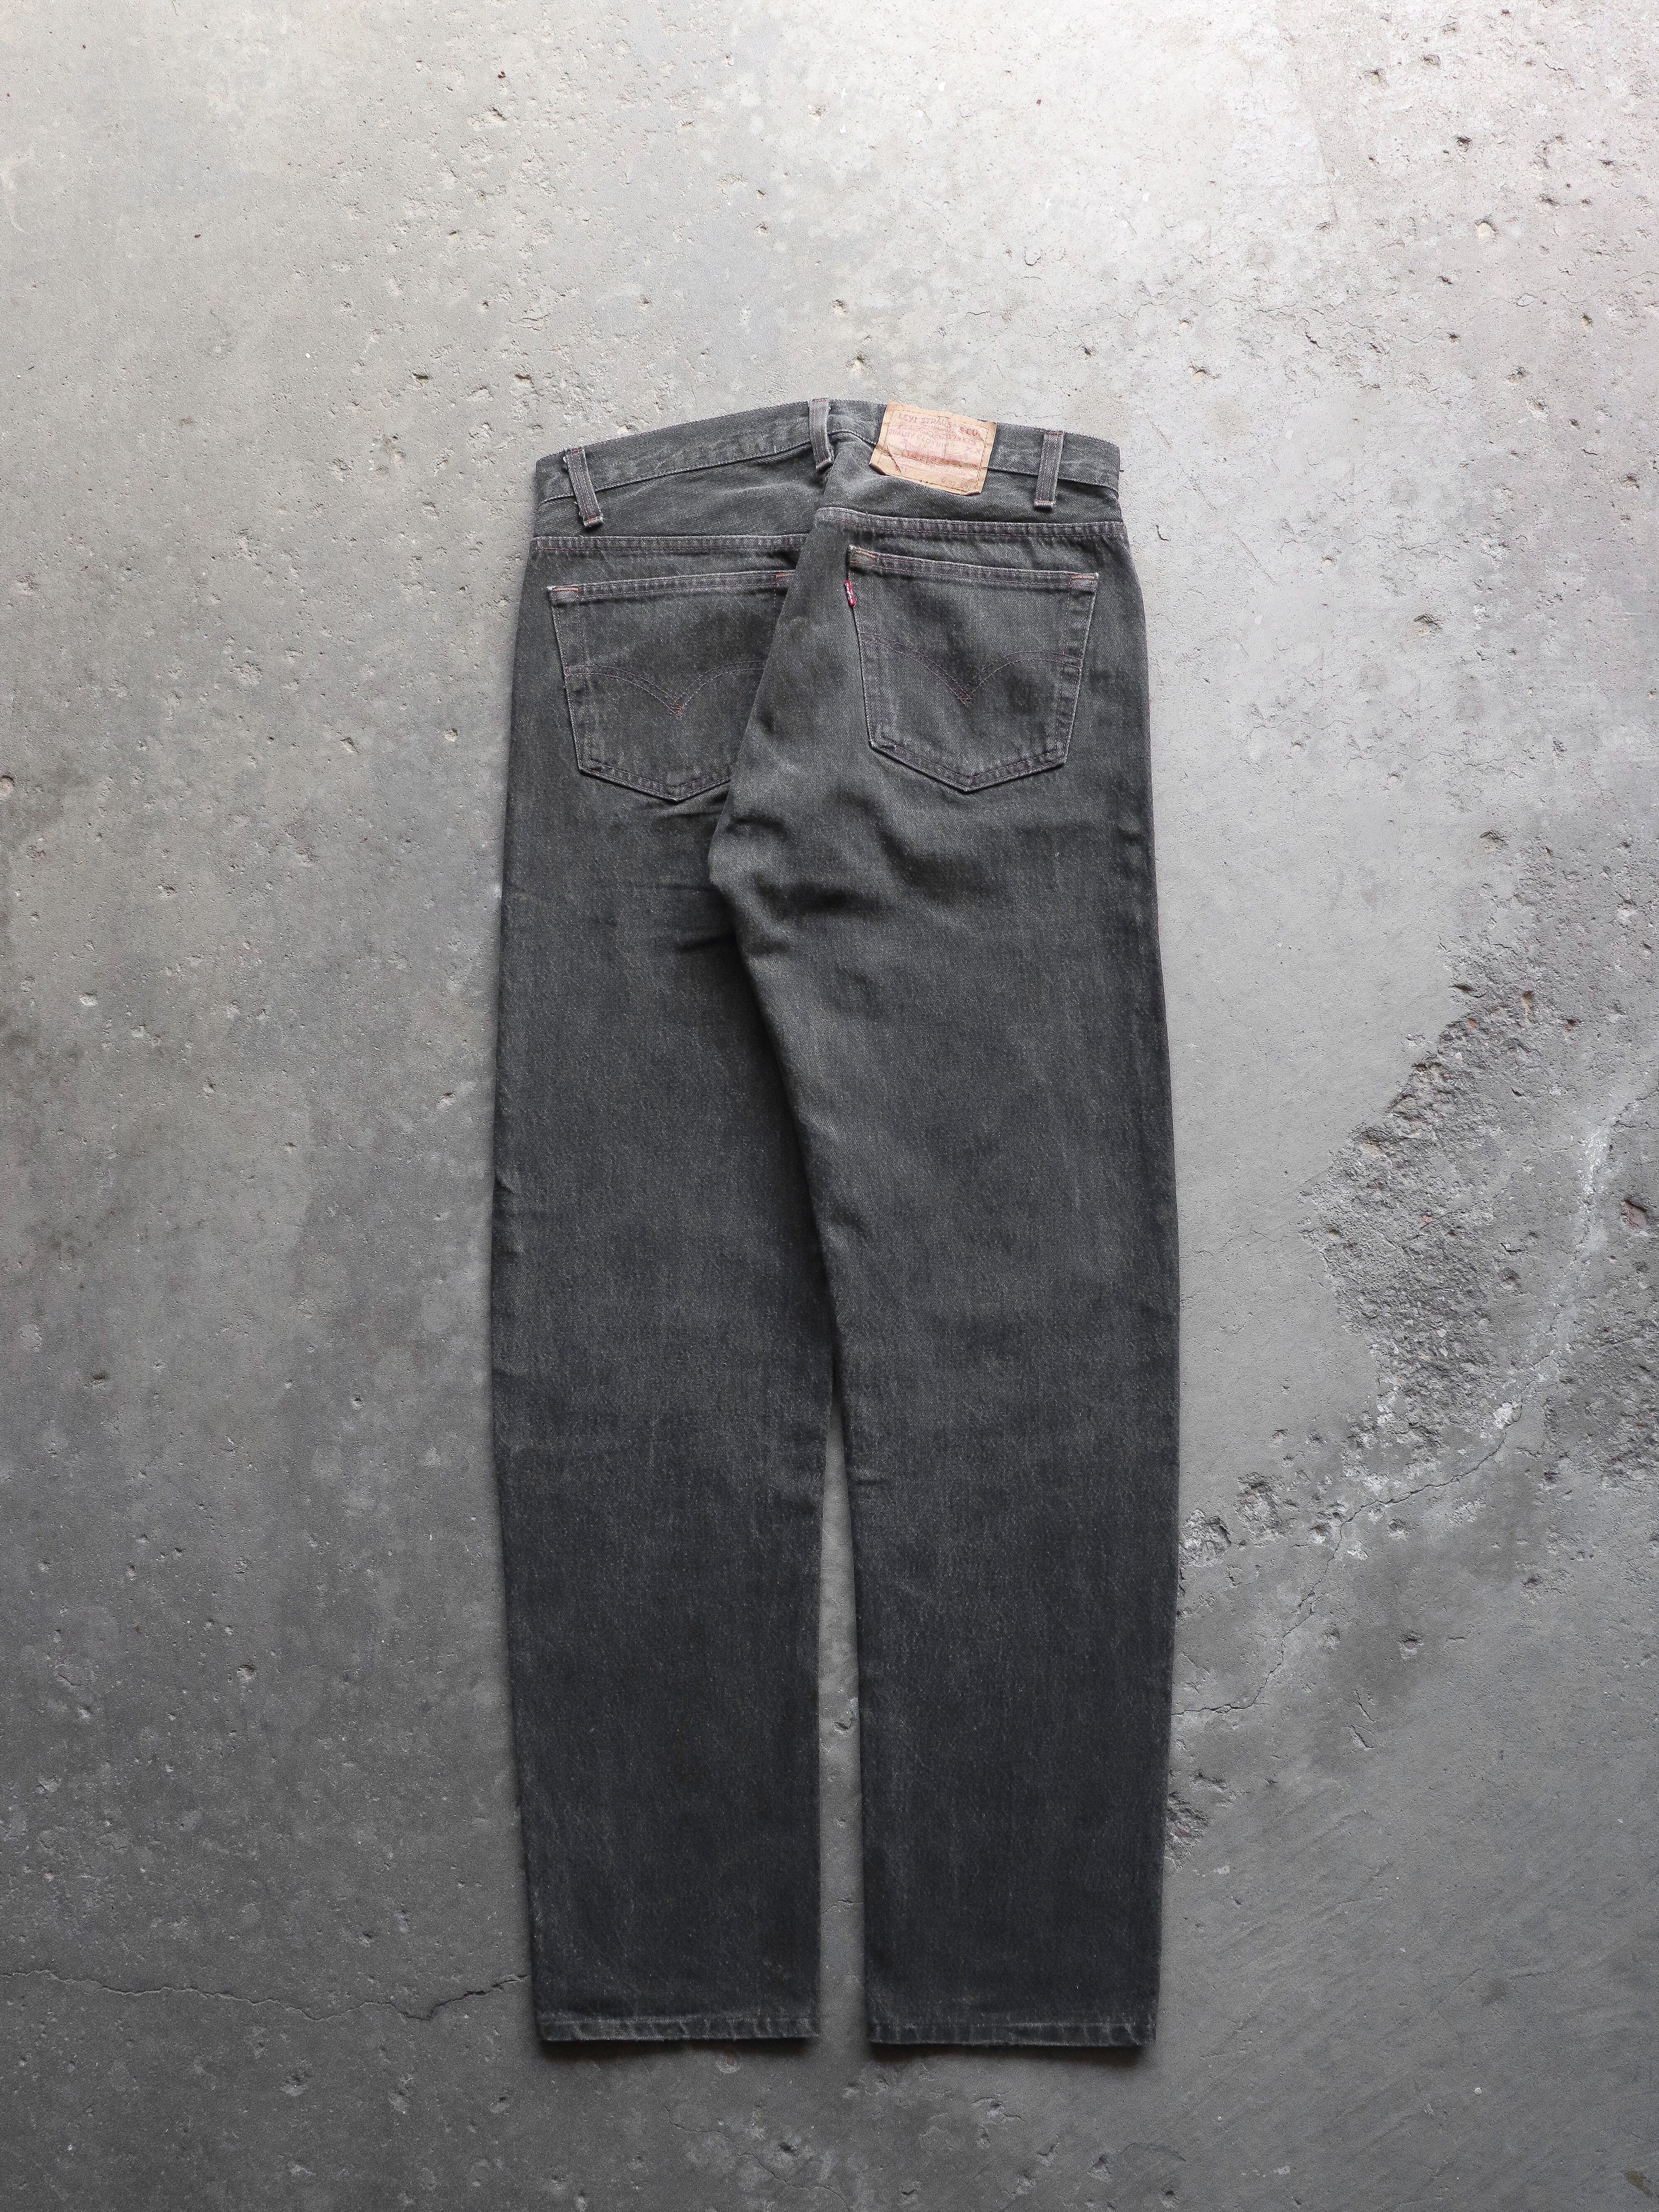 LEVIS 501 FADED CHARCOAL DENIM - 1990S – ENDS FOUND